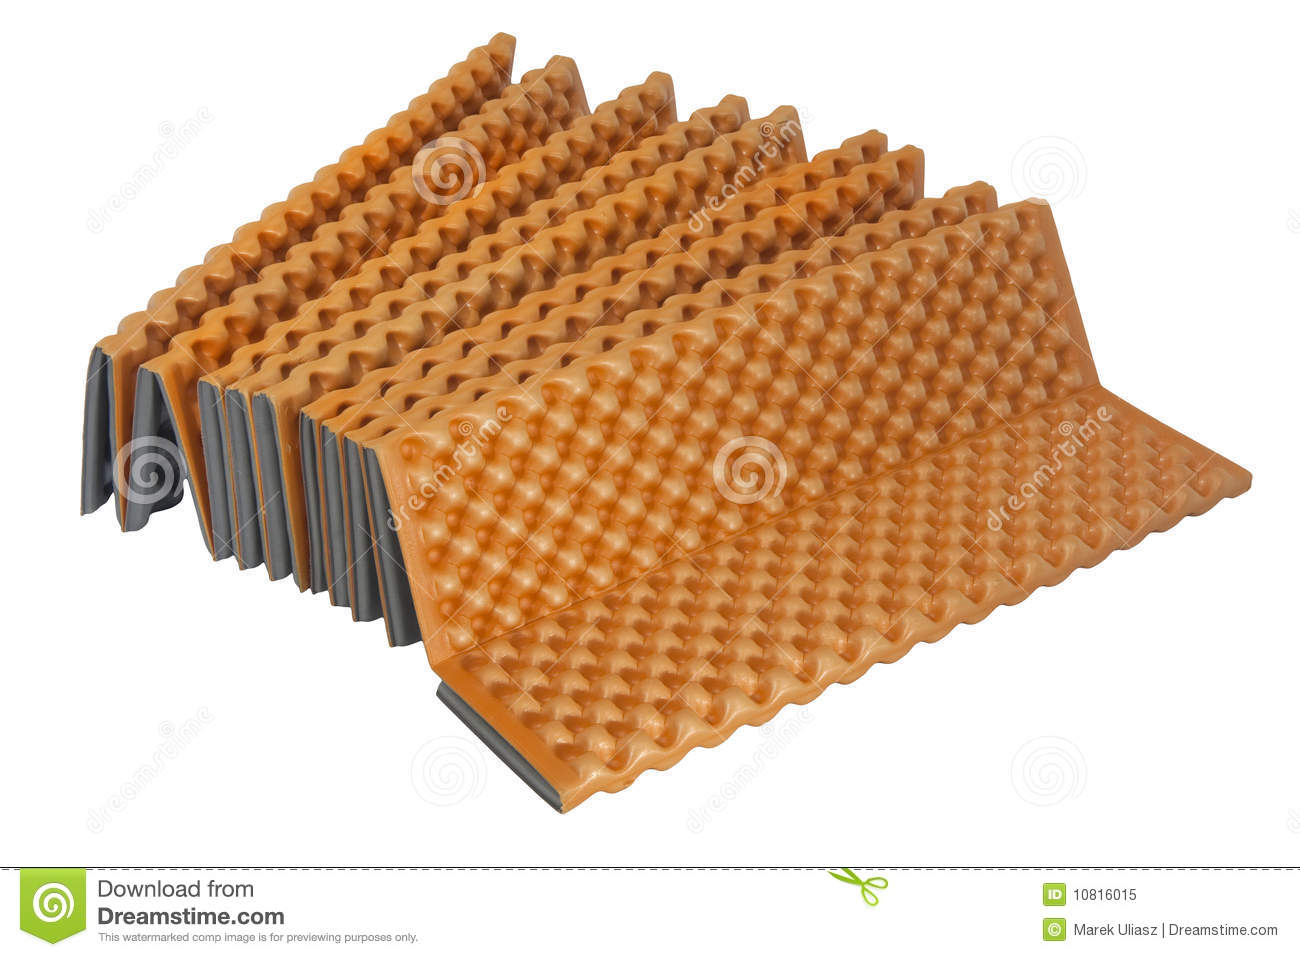 Folding Accordion Style With Egg Carton Pattern Isolated On White